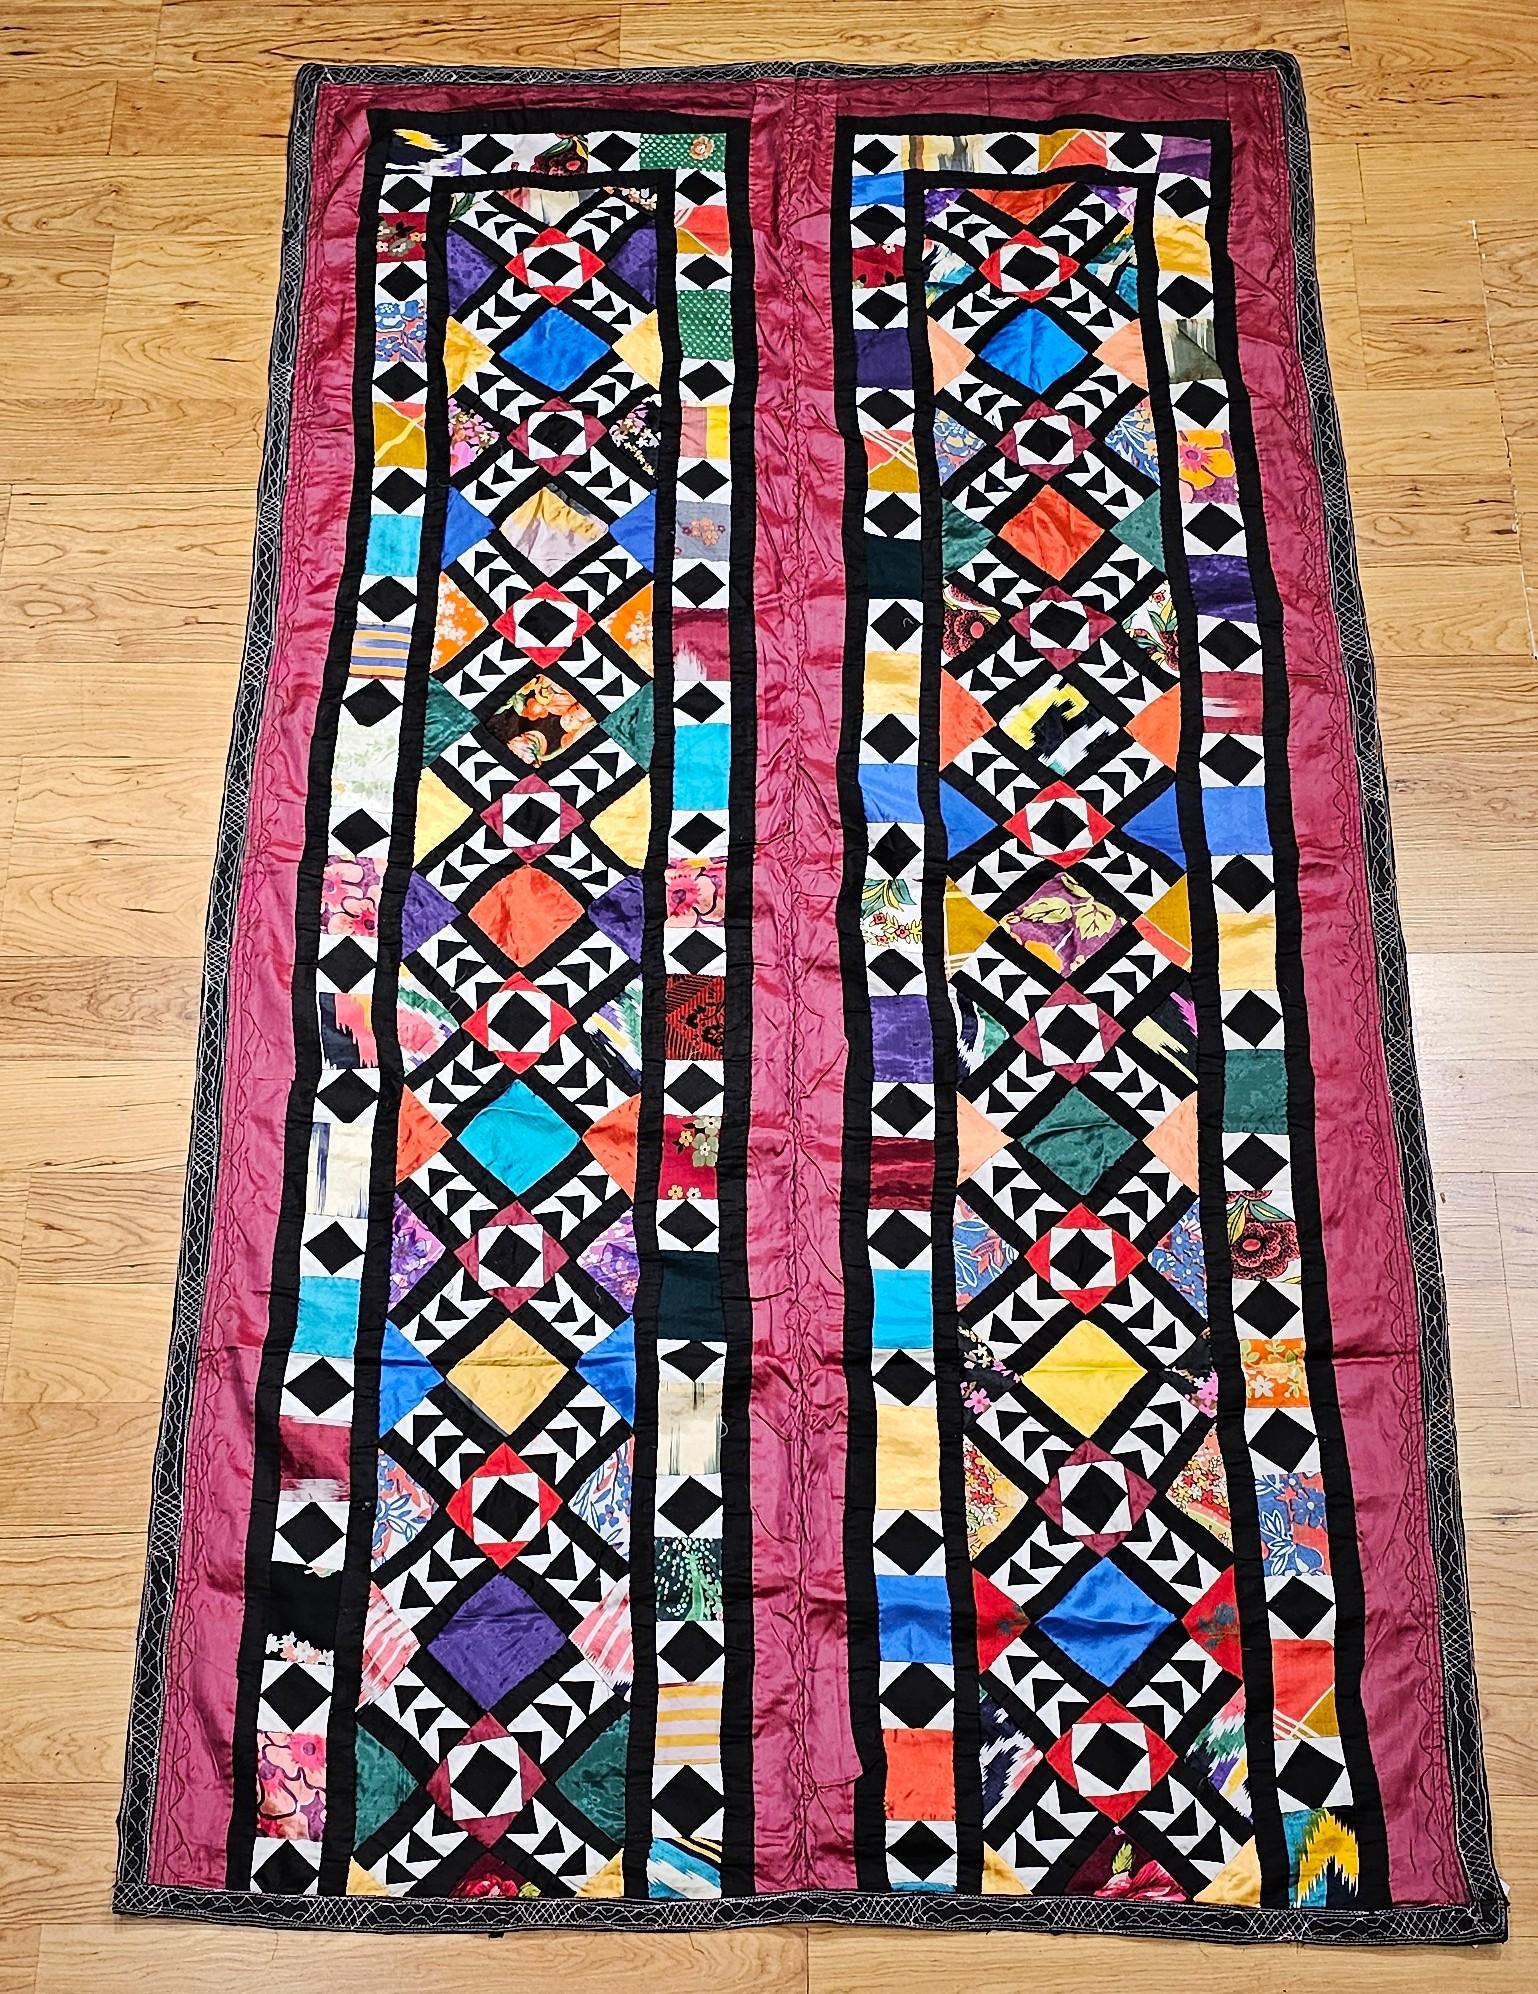  Beautiful vintage hand-stitched “pieced” silk quilt from Uzbekistan in Central Asia from the mid 1900s.  The silk fabric pieces are cut in geometric form and some of them have the design on them.  The vibrant colors are red, green, yellow, blue,